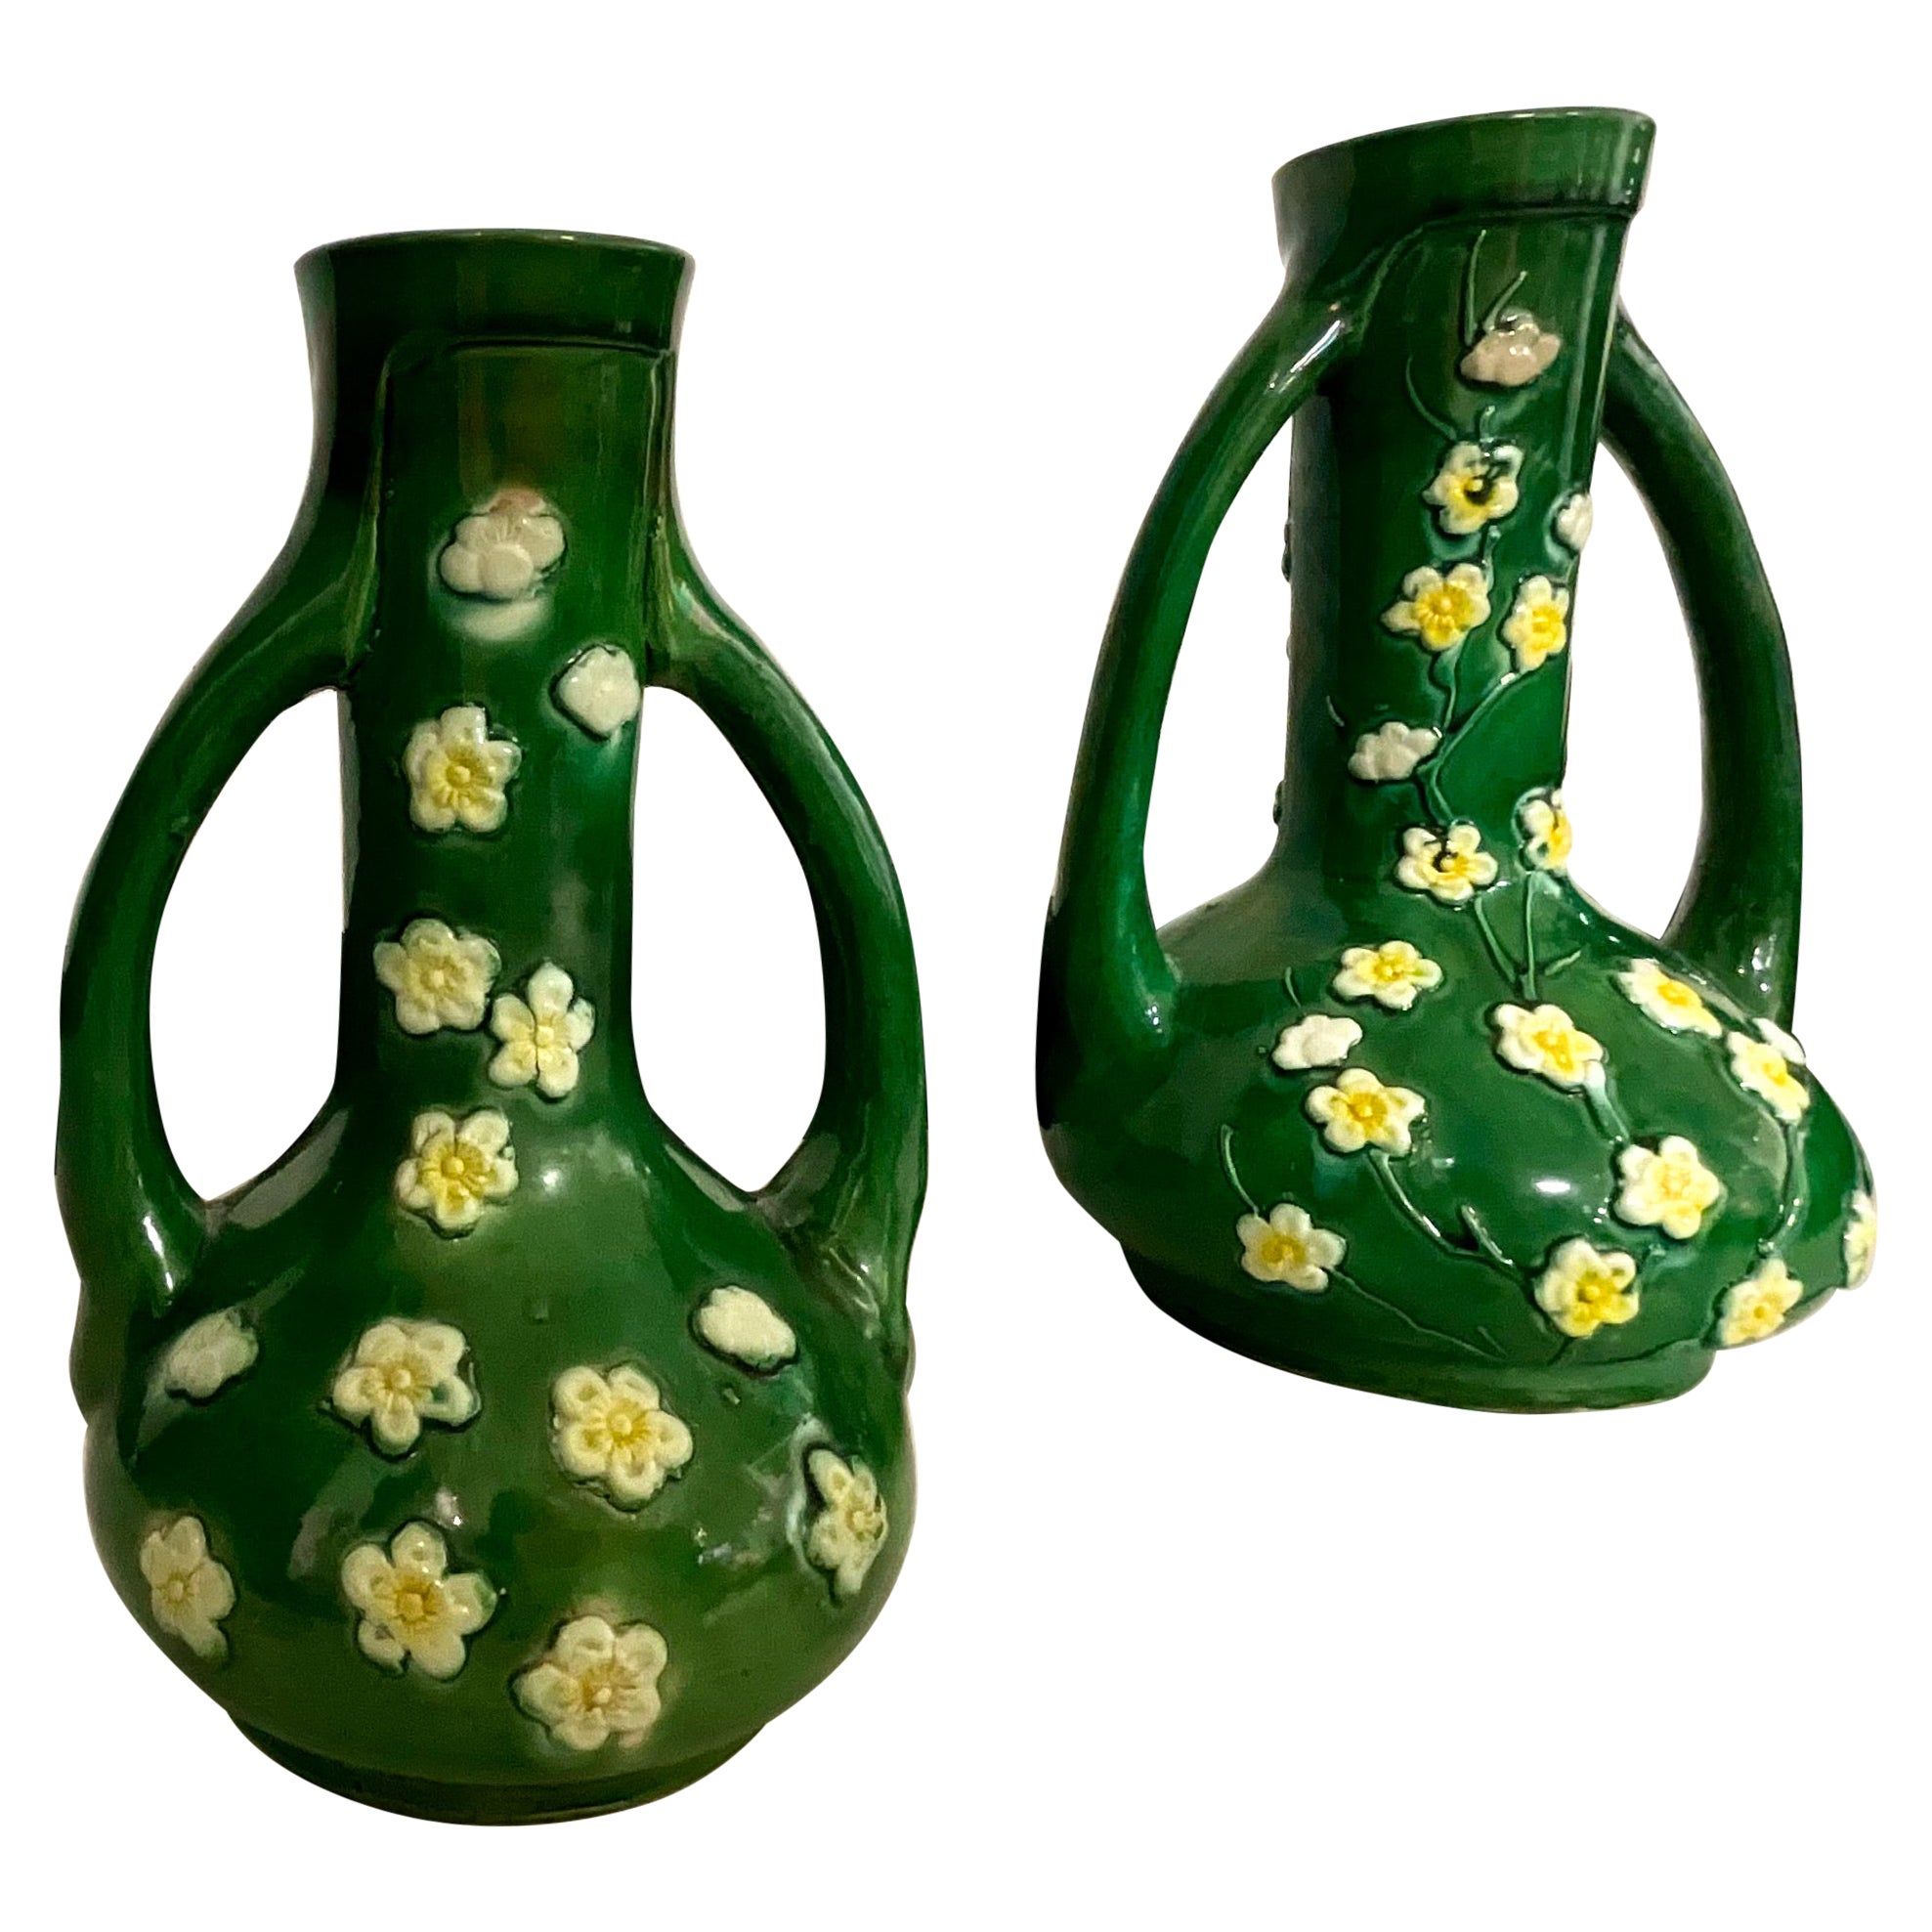 Mid-Century Chinese Export Style Green Pottery and Blossom Vases, S/2